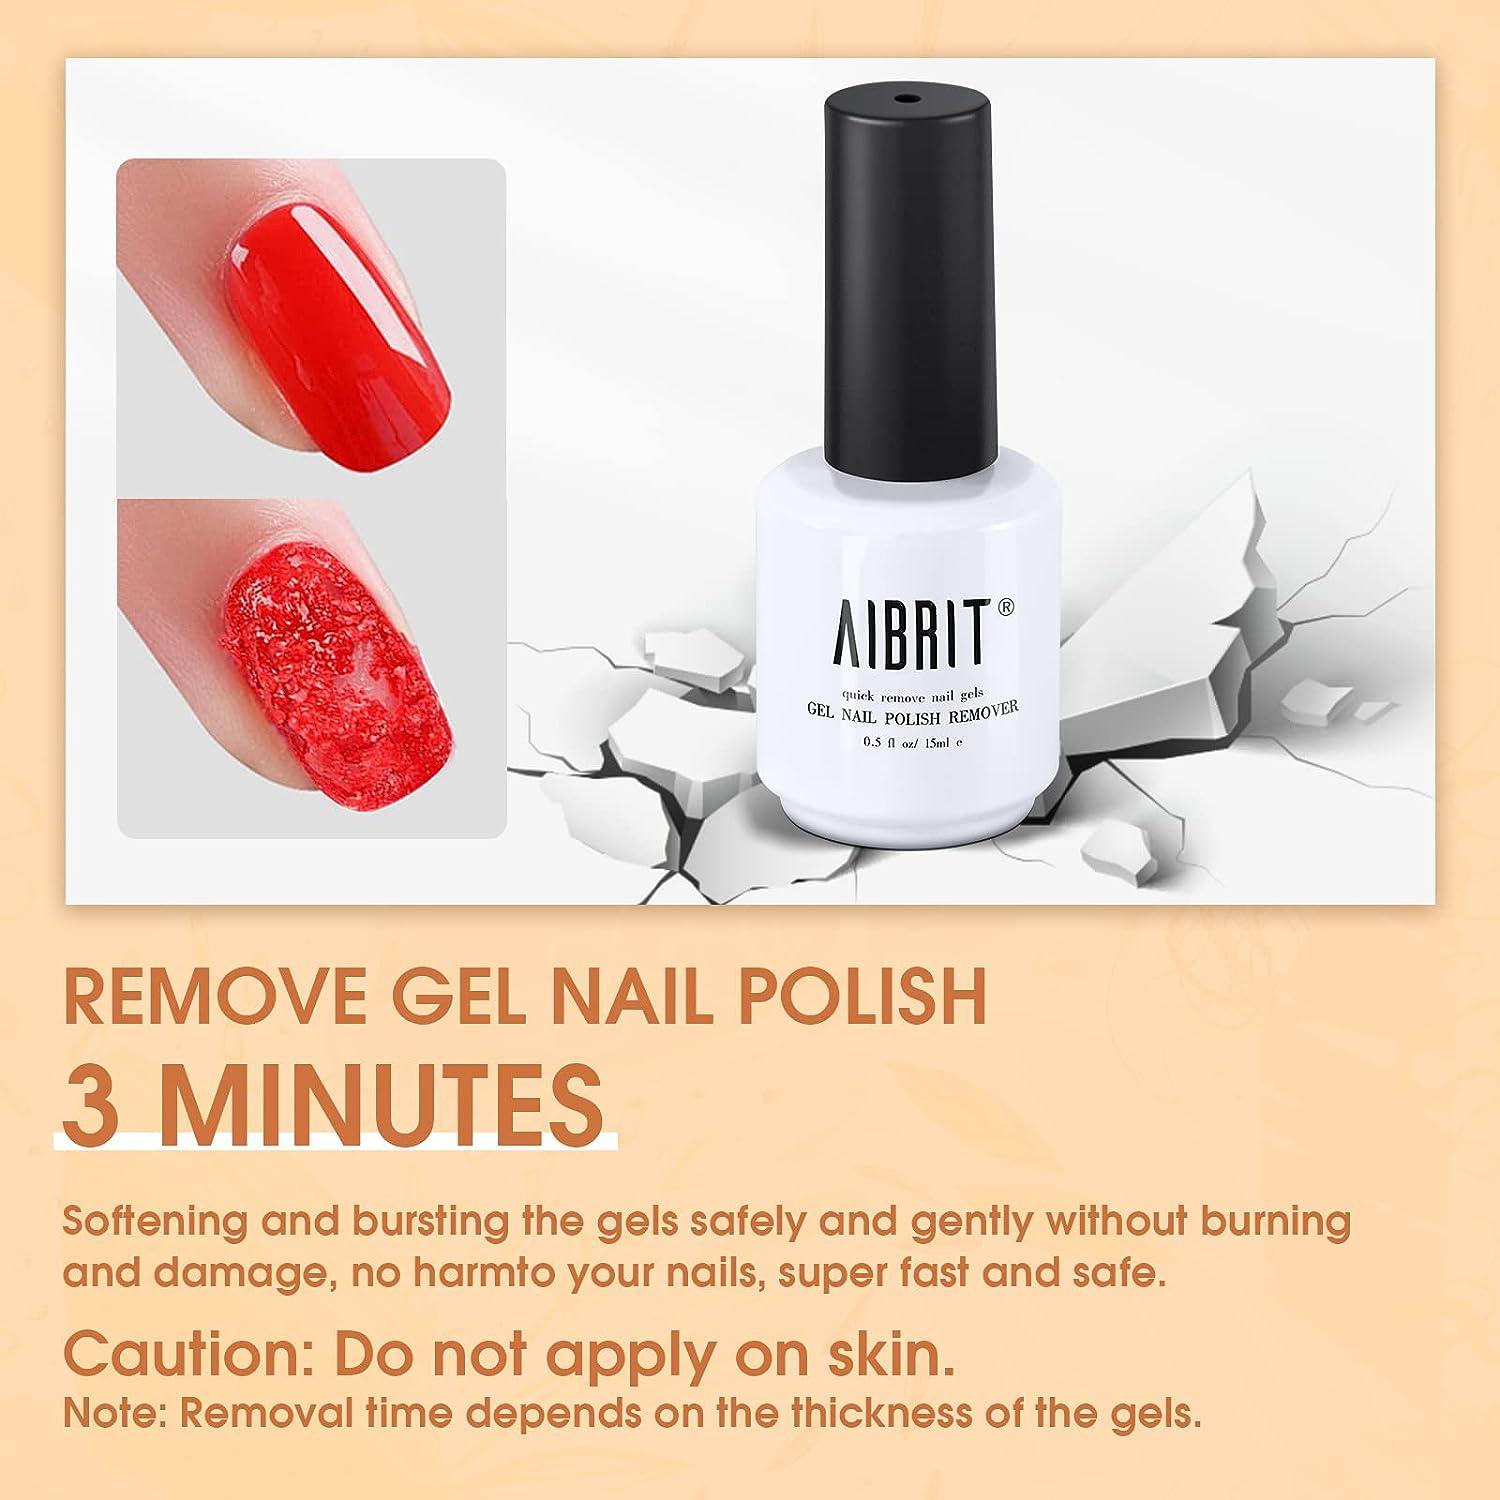 Amazon.com : BesTby Gel Nail Polish Remover (2 PACKS 15ML), Professional Gel  Polish Remover 3-5 Minutes with Liquid Latex Tape Protect Cuticle, Quickly  & Easily Gel Remover Tool Remove Gel Nail Polish :